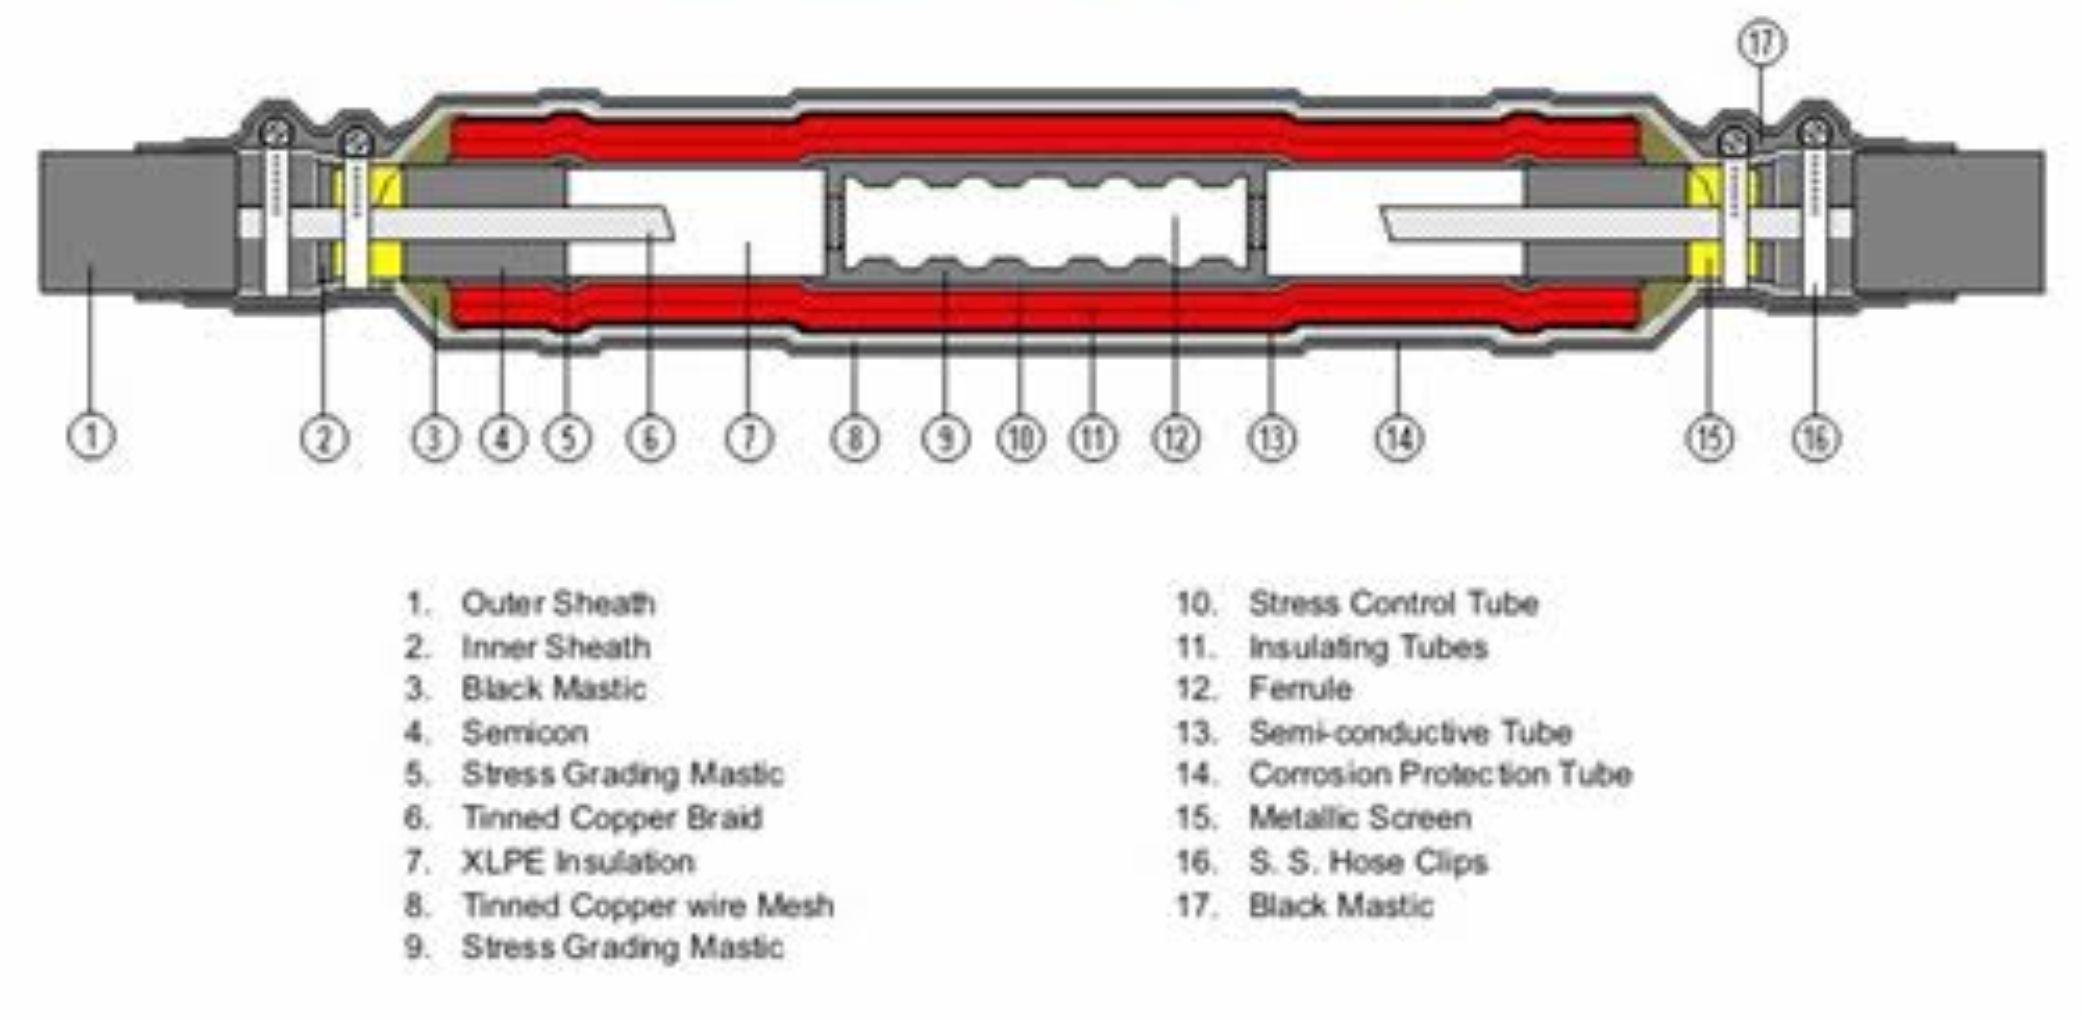 cable jointing kits